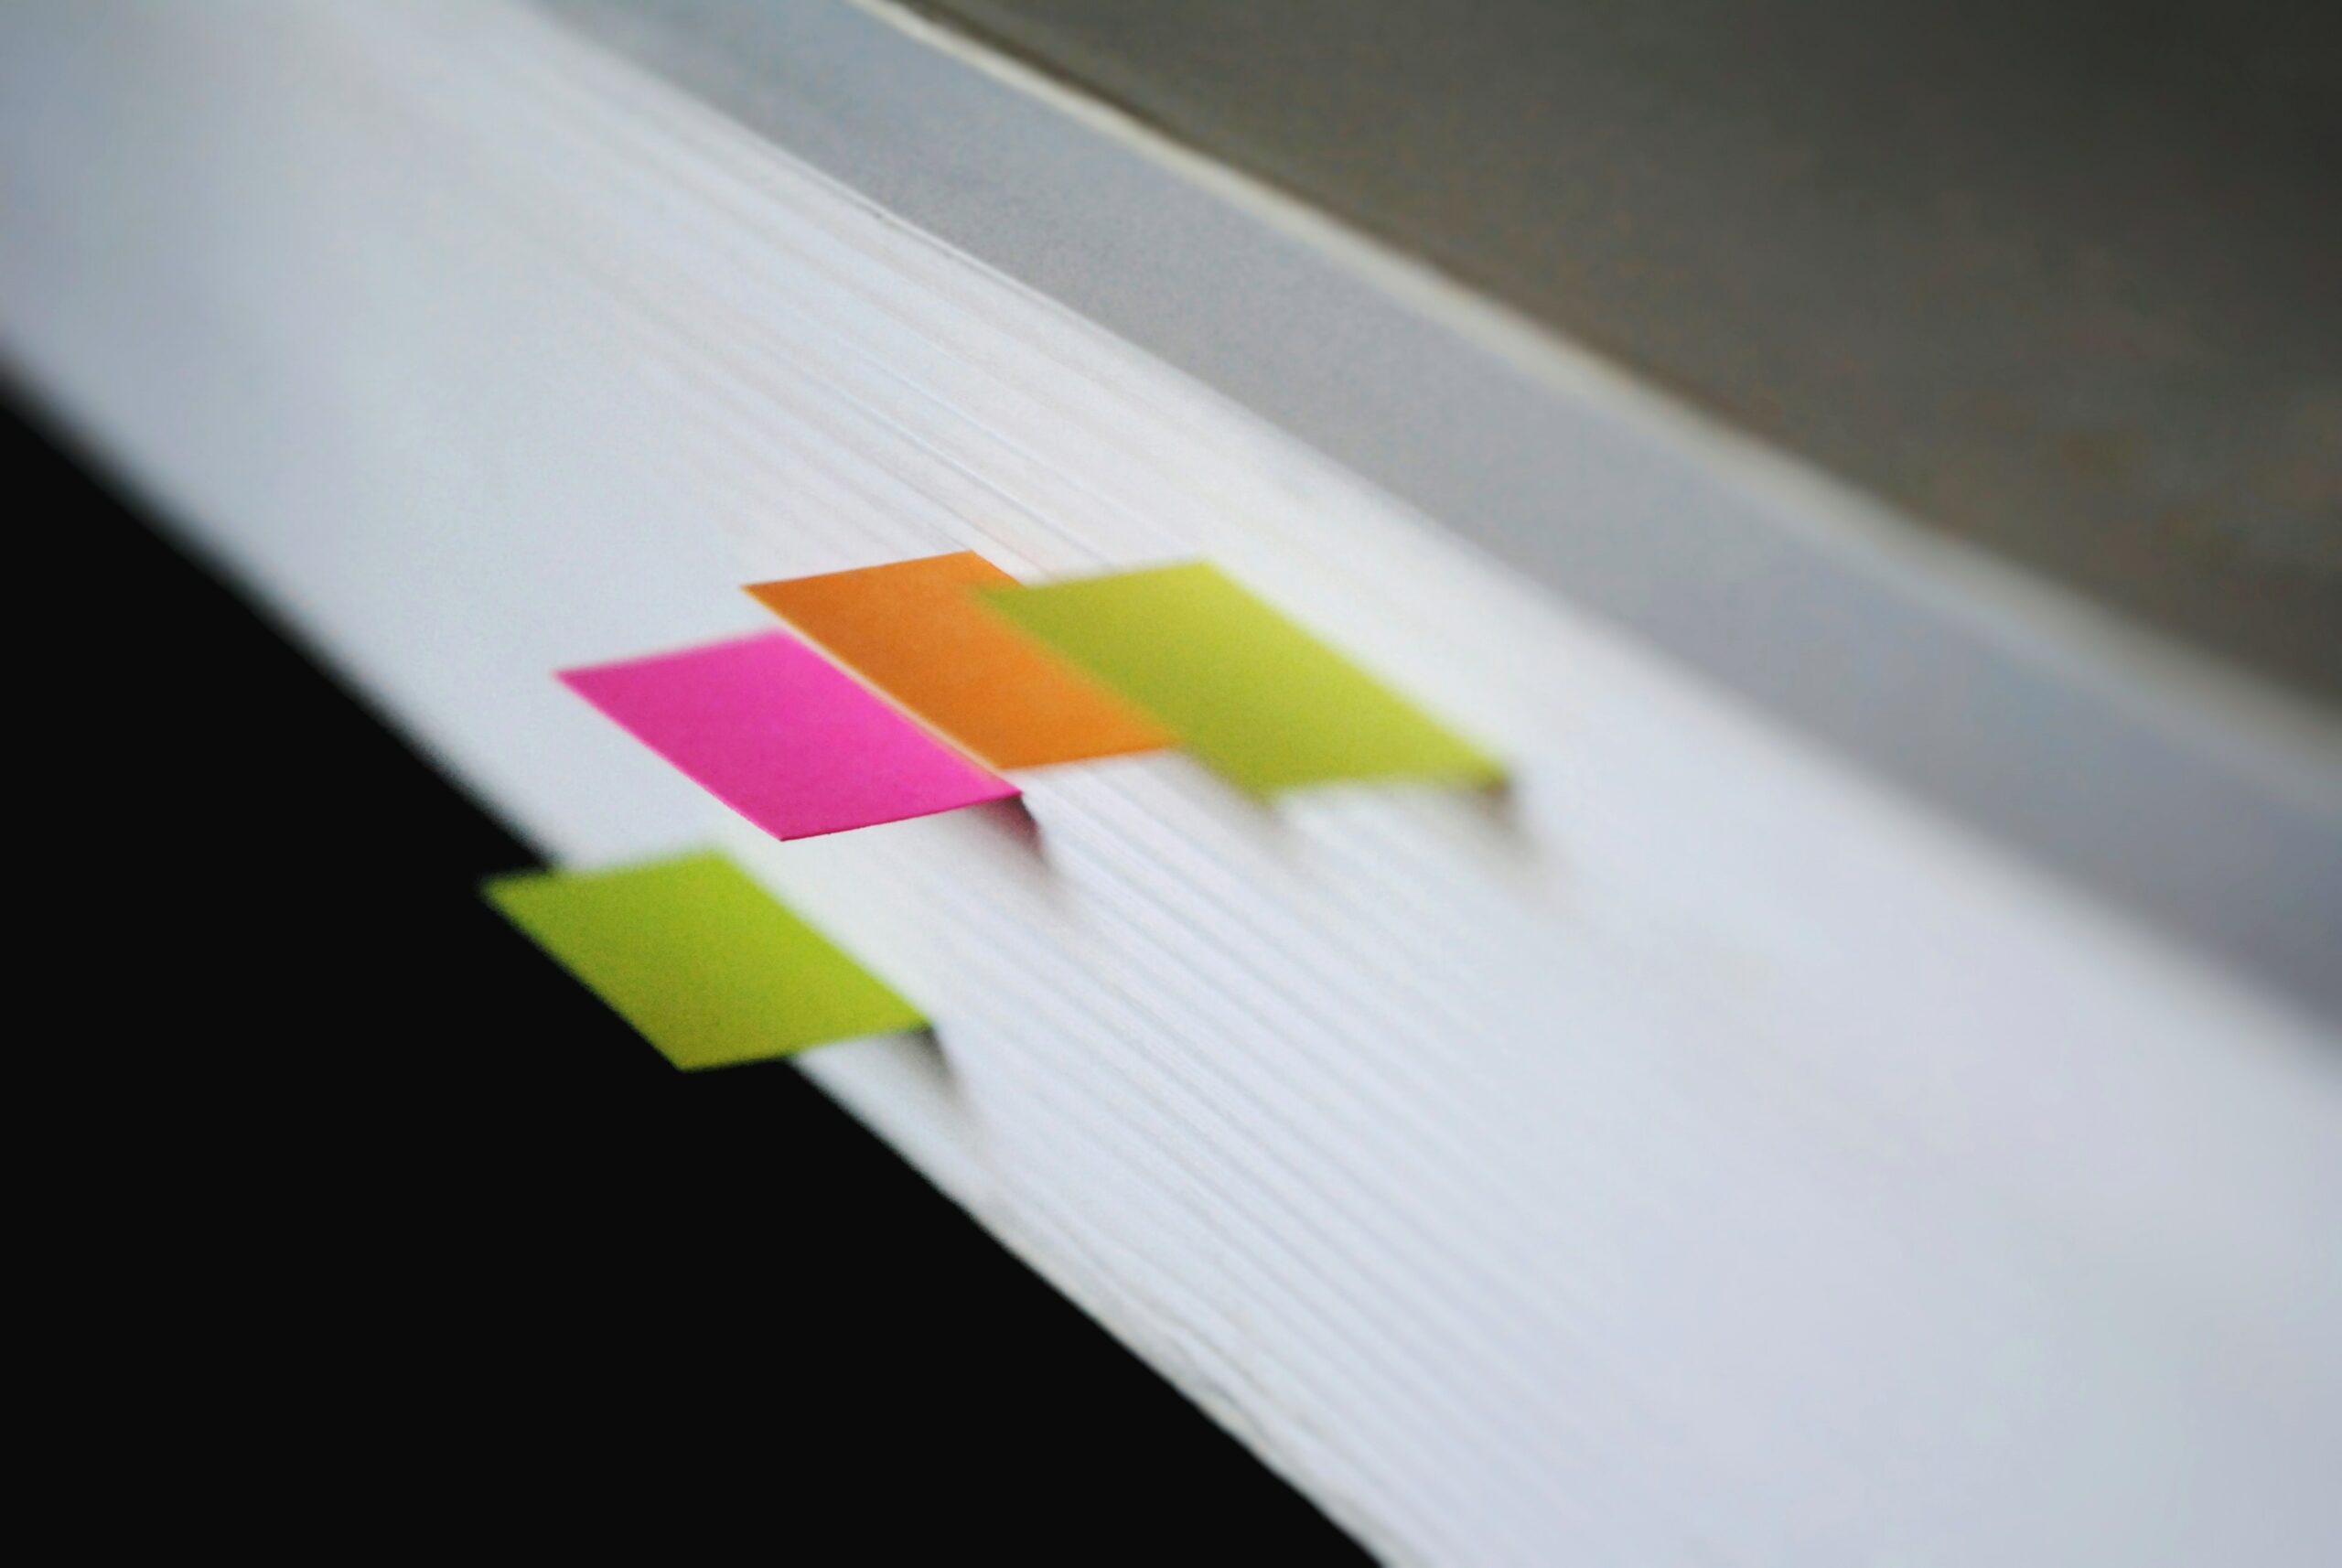 Highlighted sticky notes in a case file